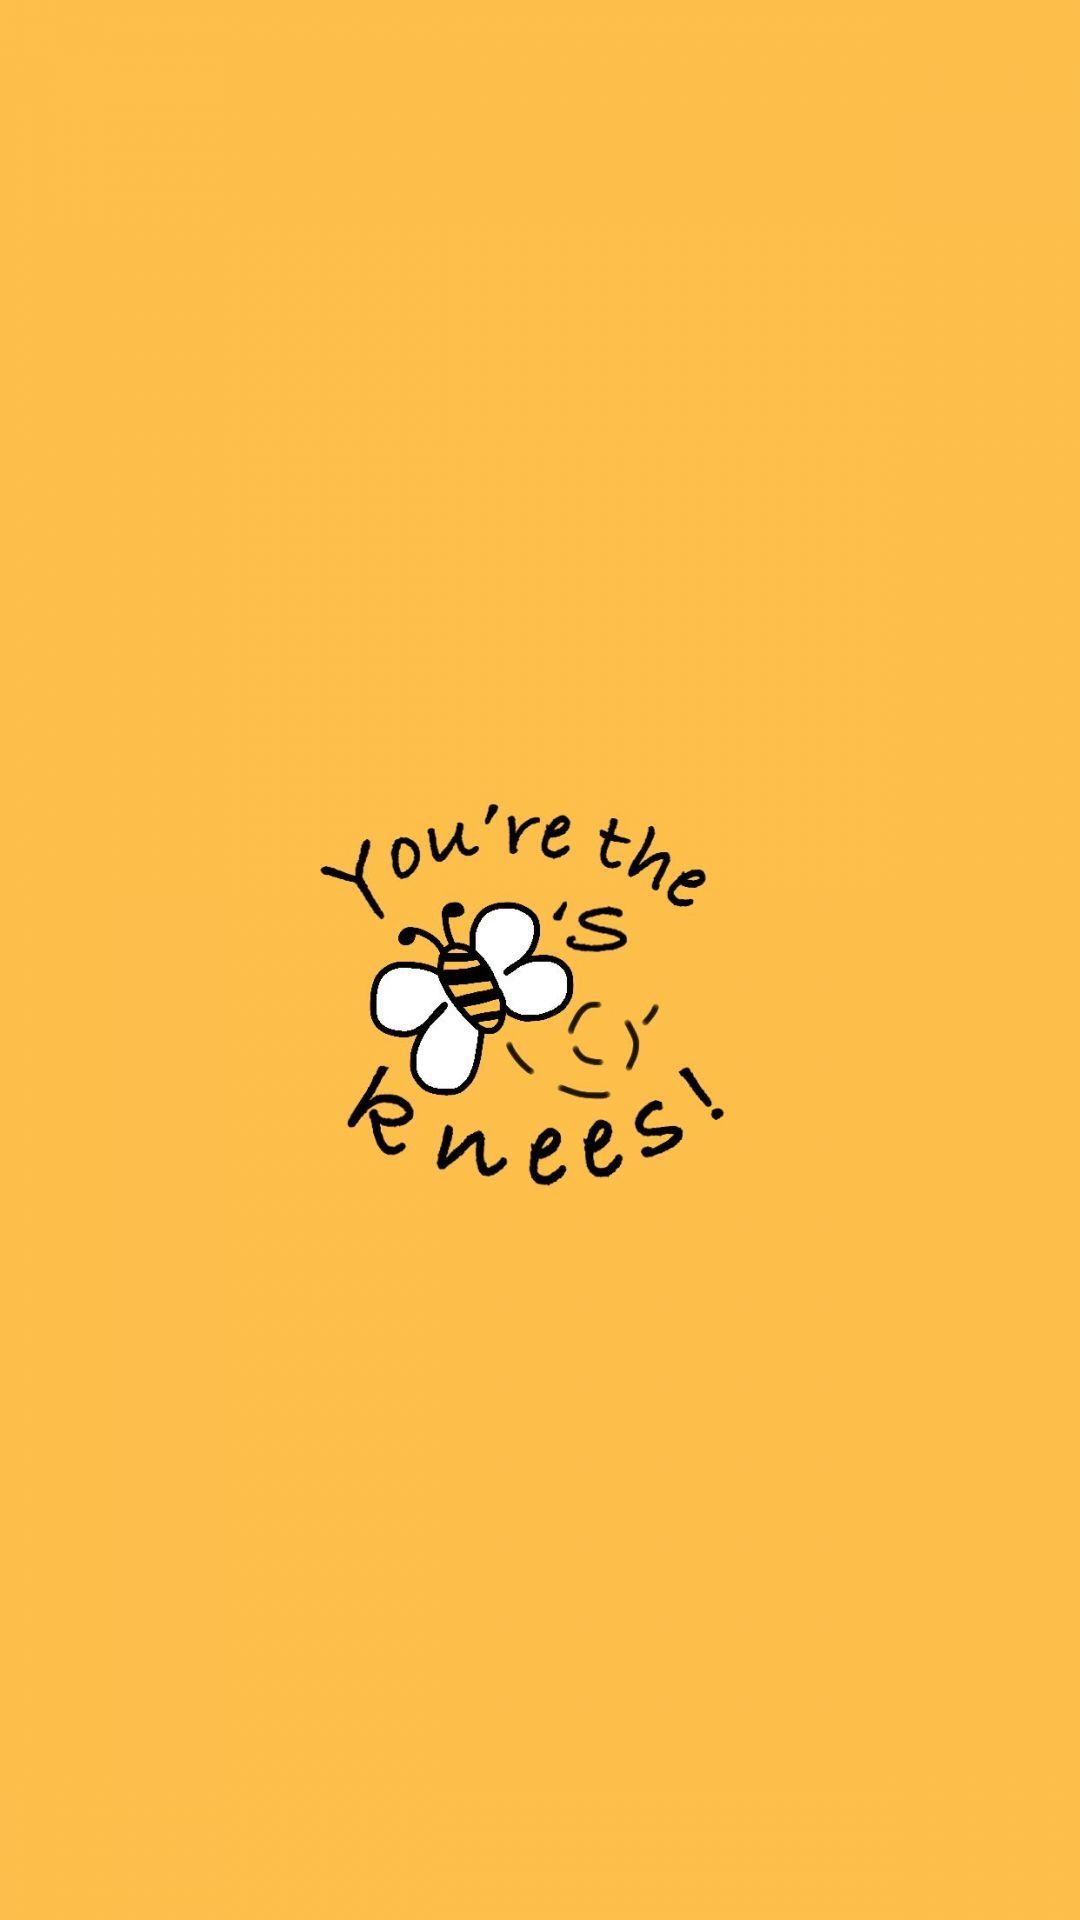 You're the bees knees! - Positivity